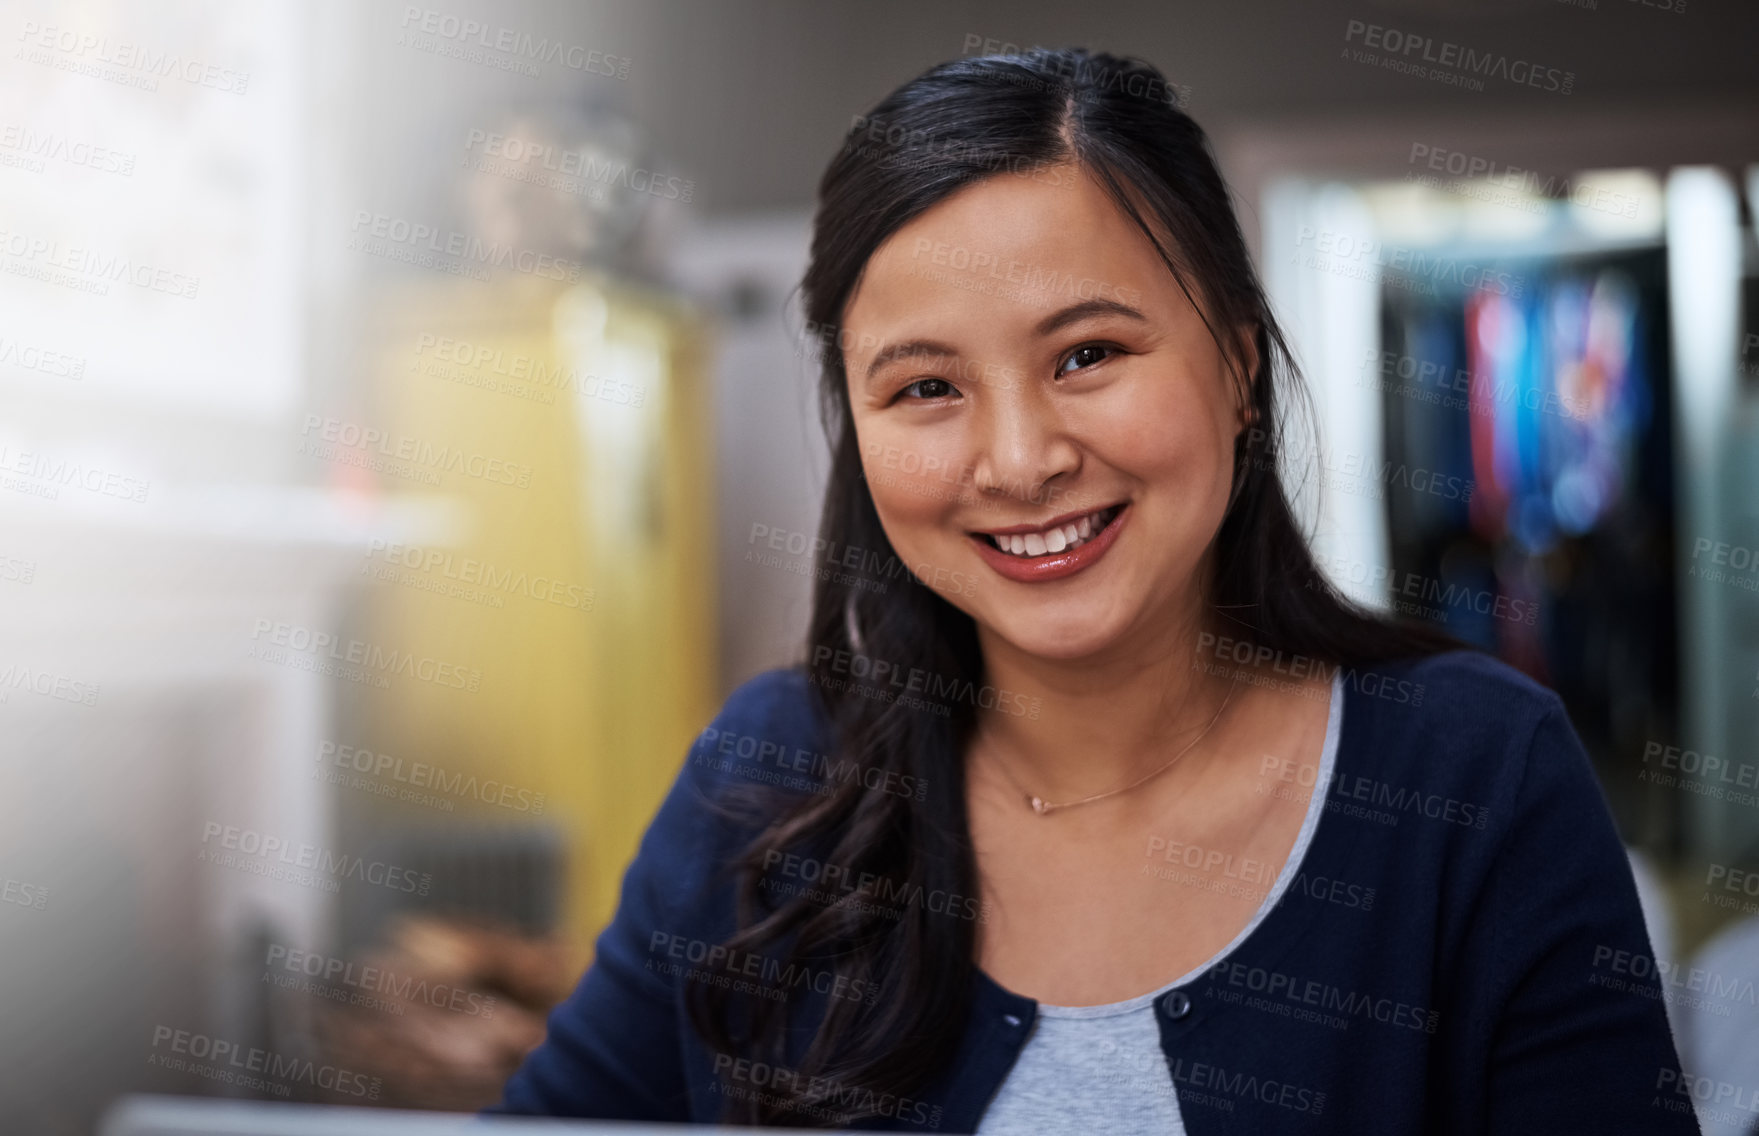 Buy stock photo Cropped portrait of an attractive young female entrepreneur working from home